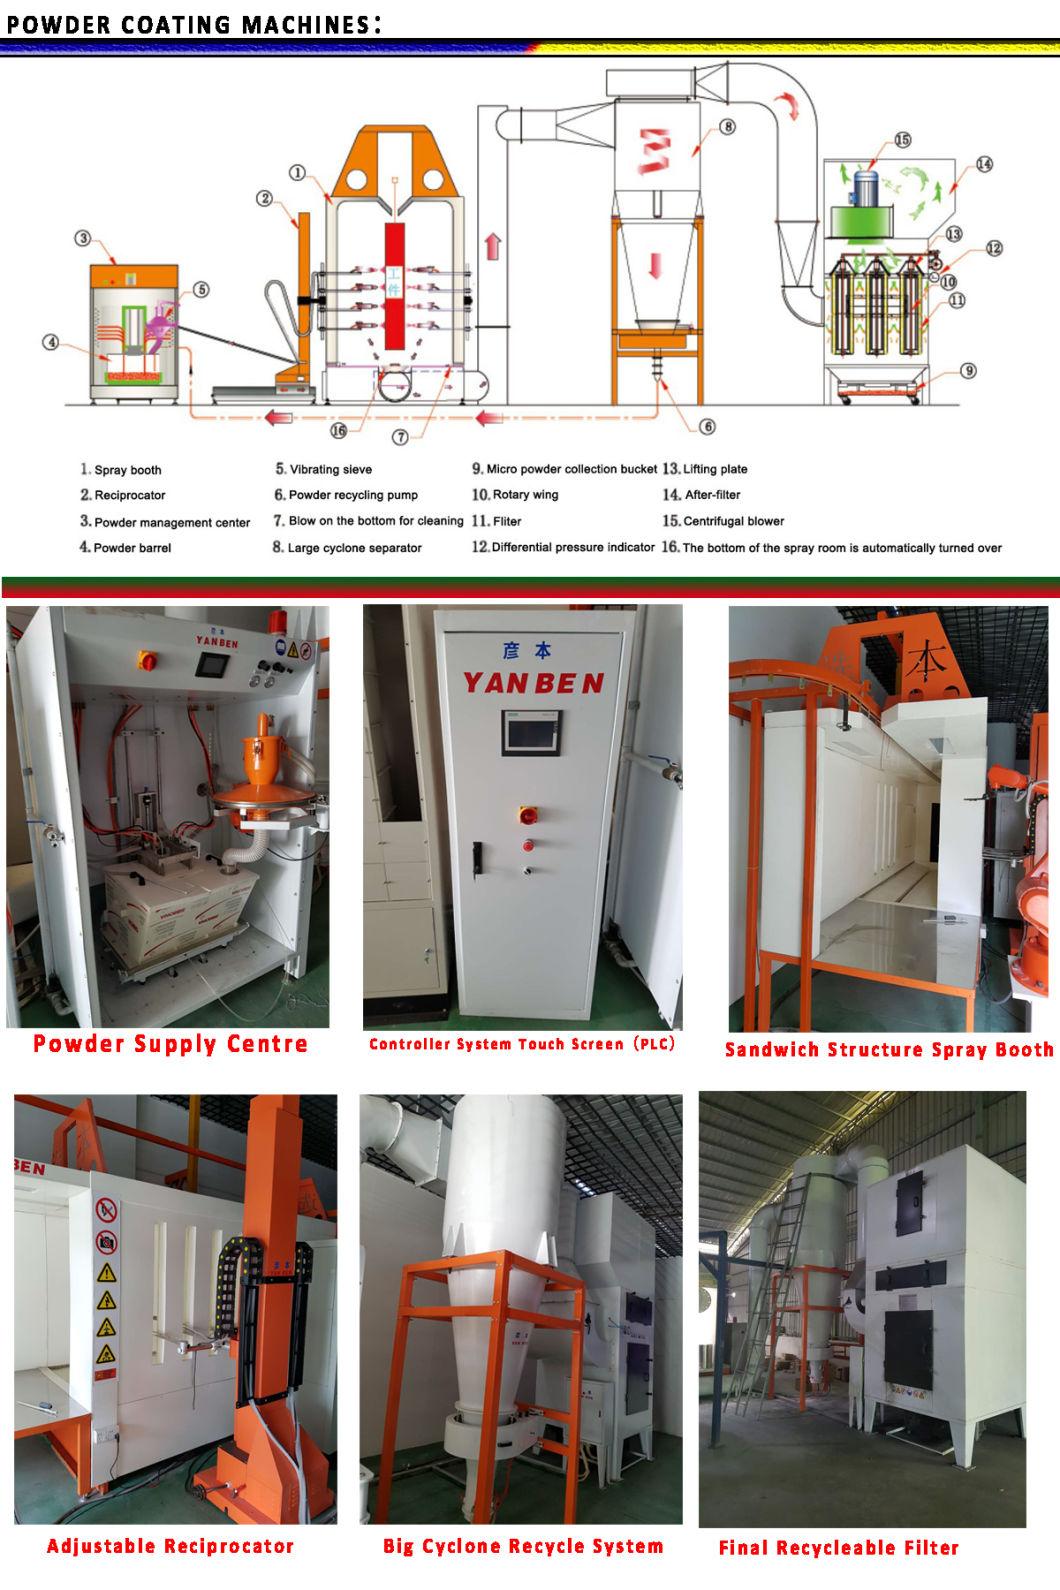 Reciprocator The Powder Painting Robot for Powder Coating Production Line